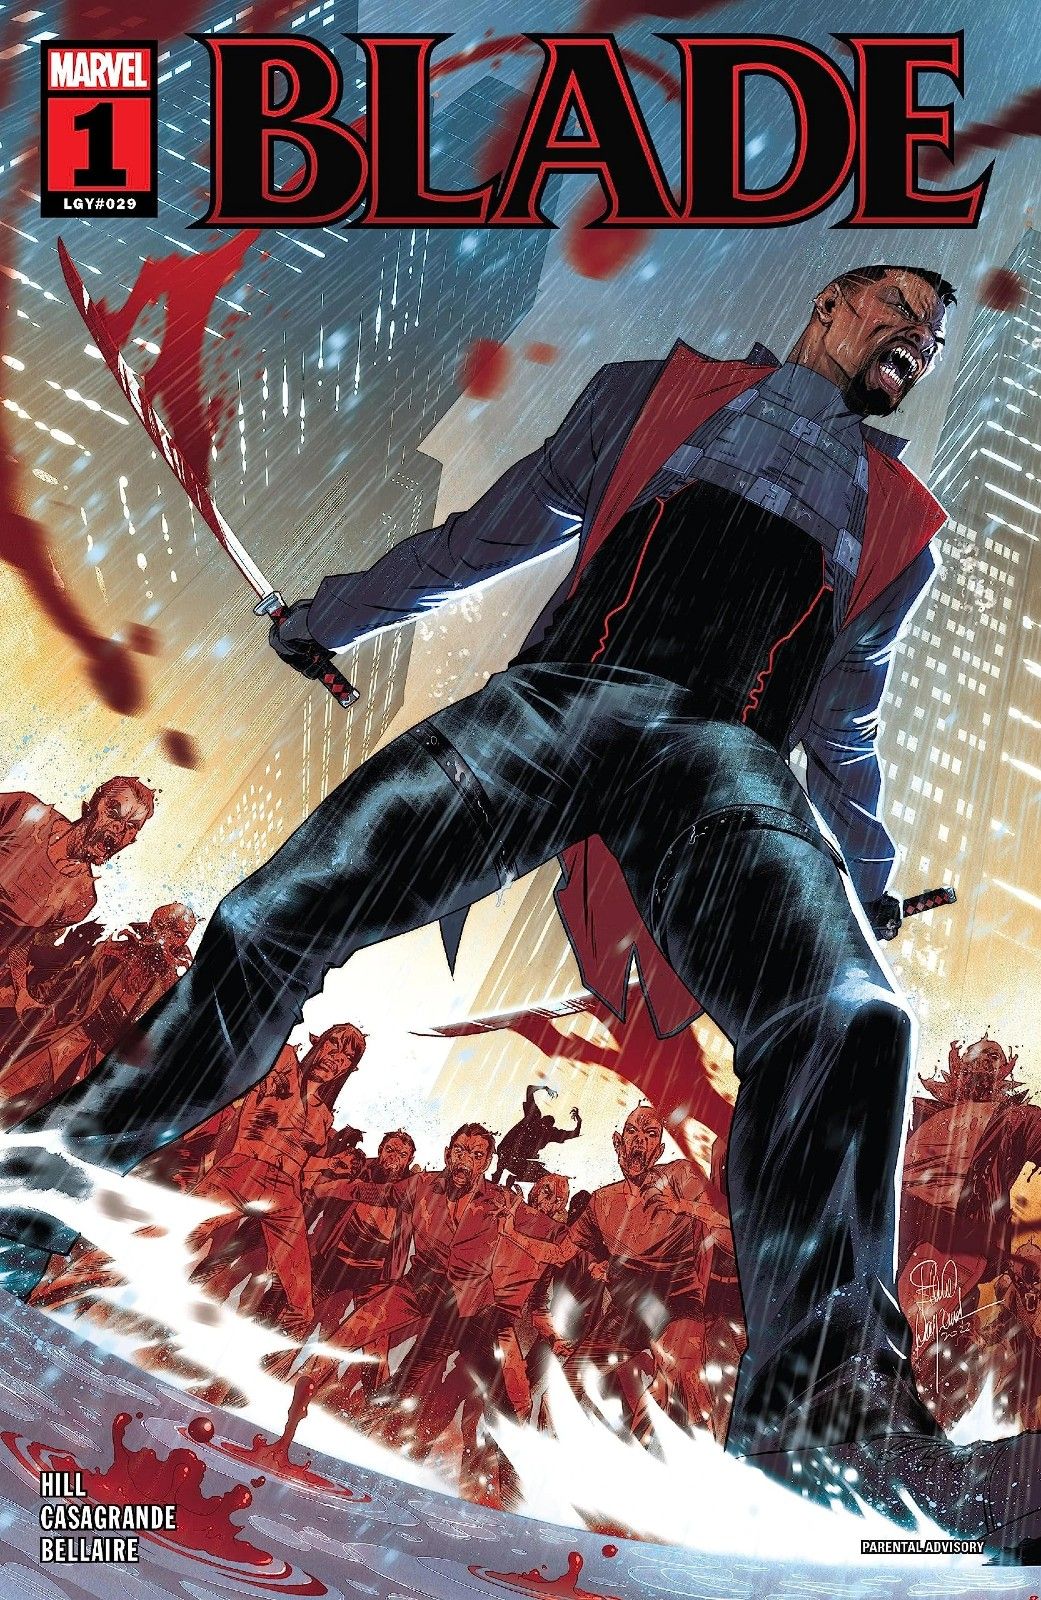 Blade battles an army of vampires on the cover of Blade (Vol. 5) #1 by Marvel Comics